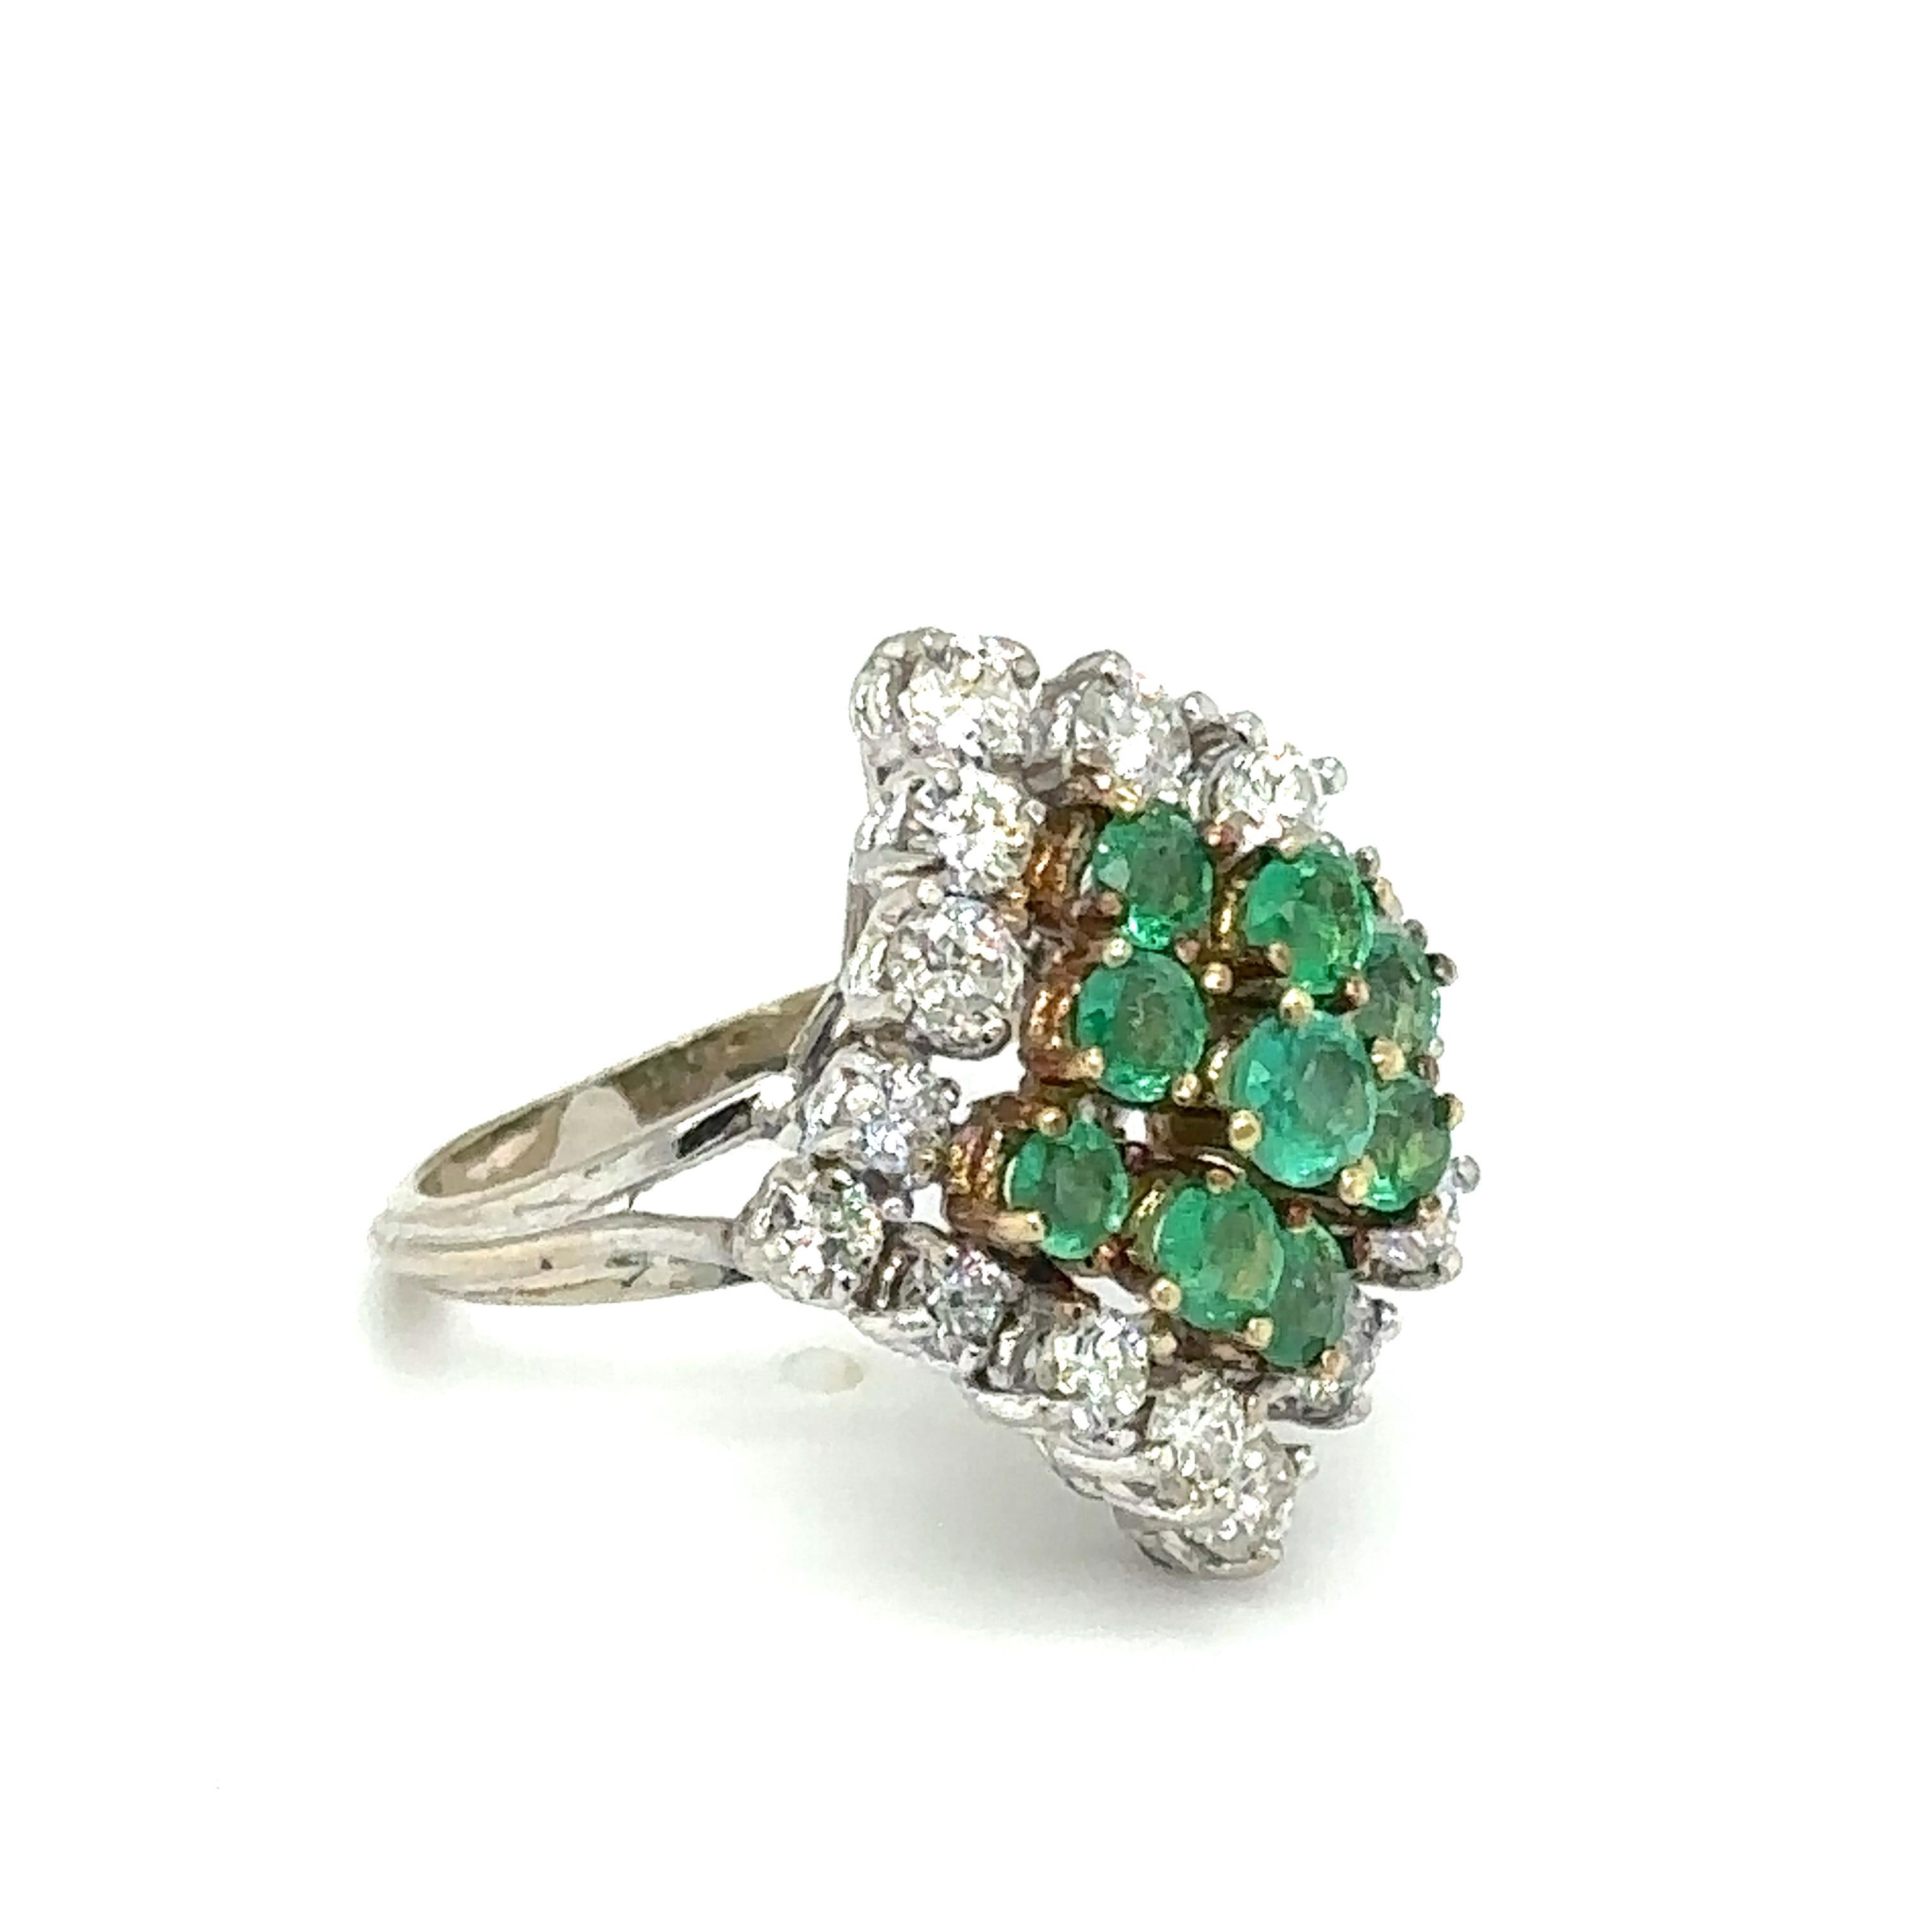 Women's or Men's Emerald and Diamond Cocktail Ring in 14 Karat White Gold, circa 1950s For Sale